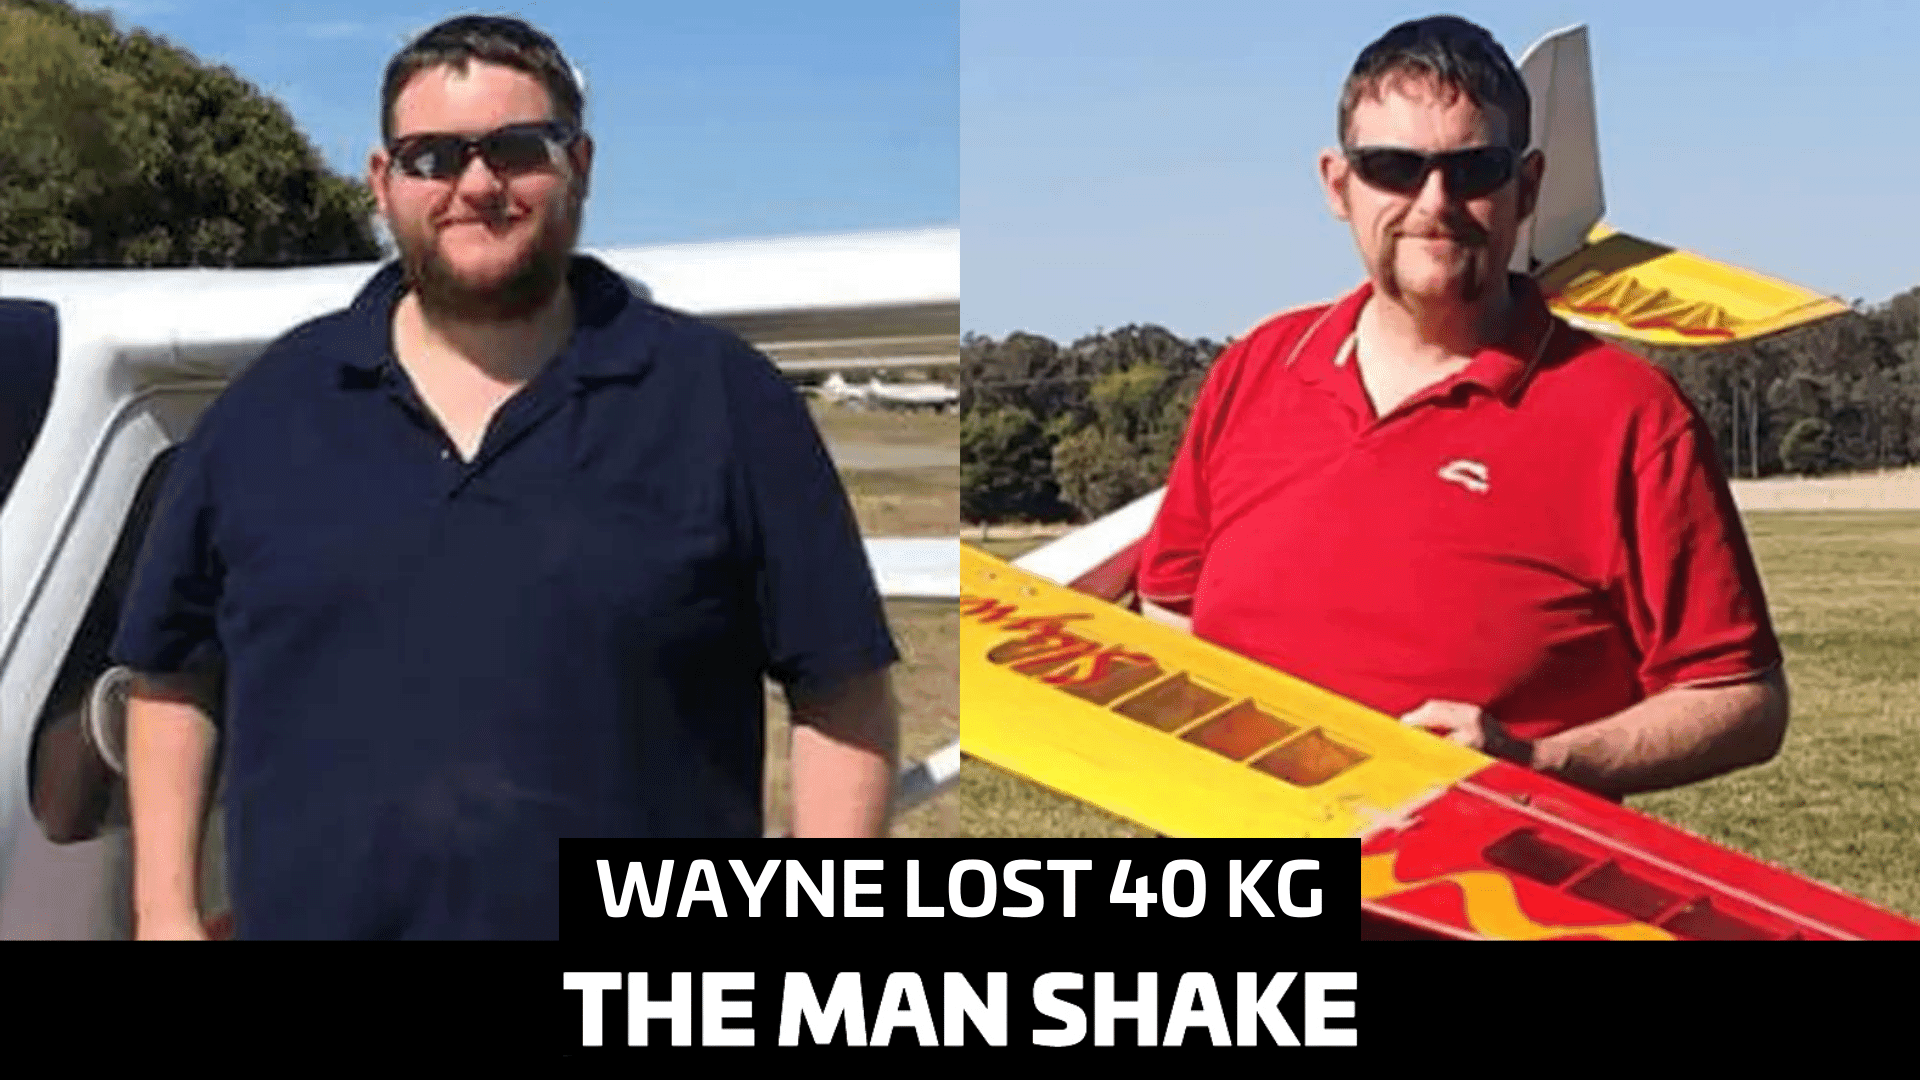 Wayne lost 40kg and followed his dream!